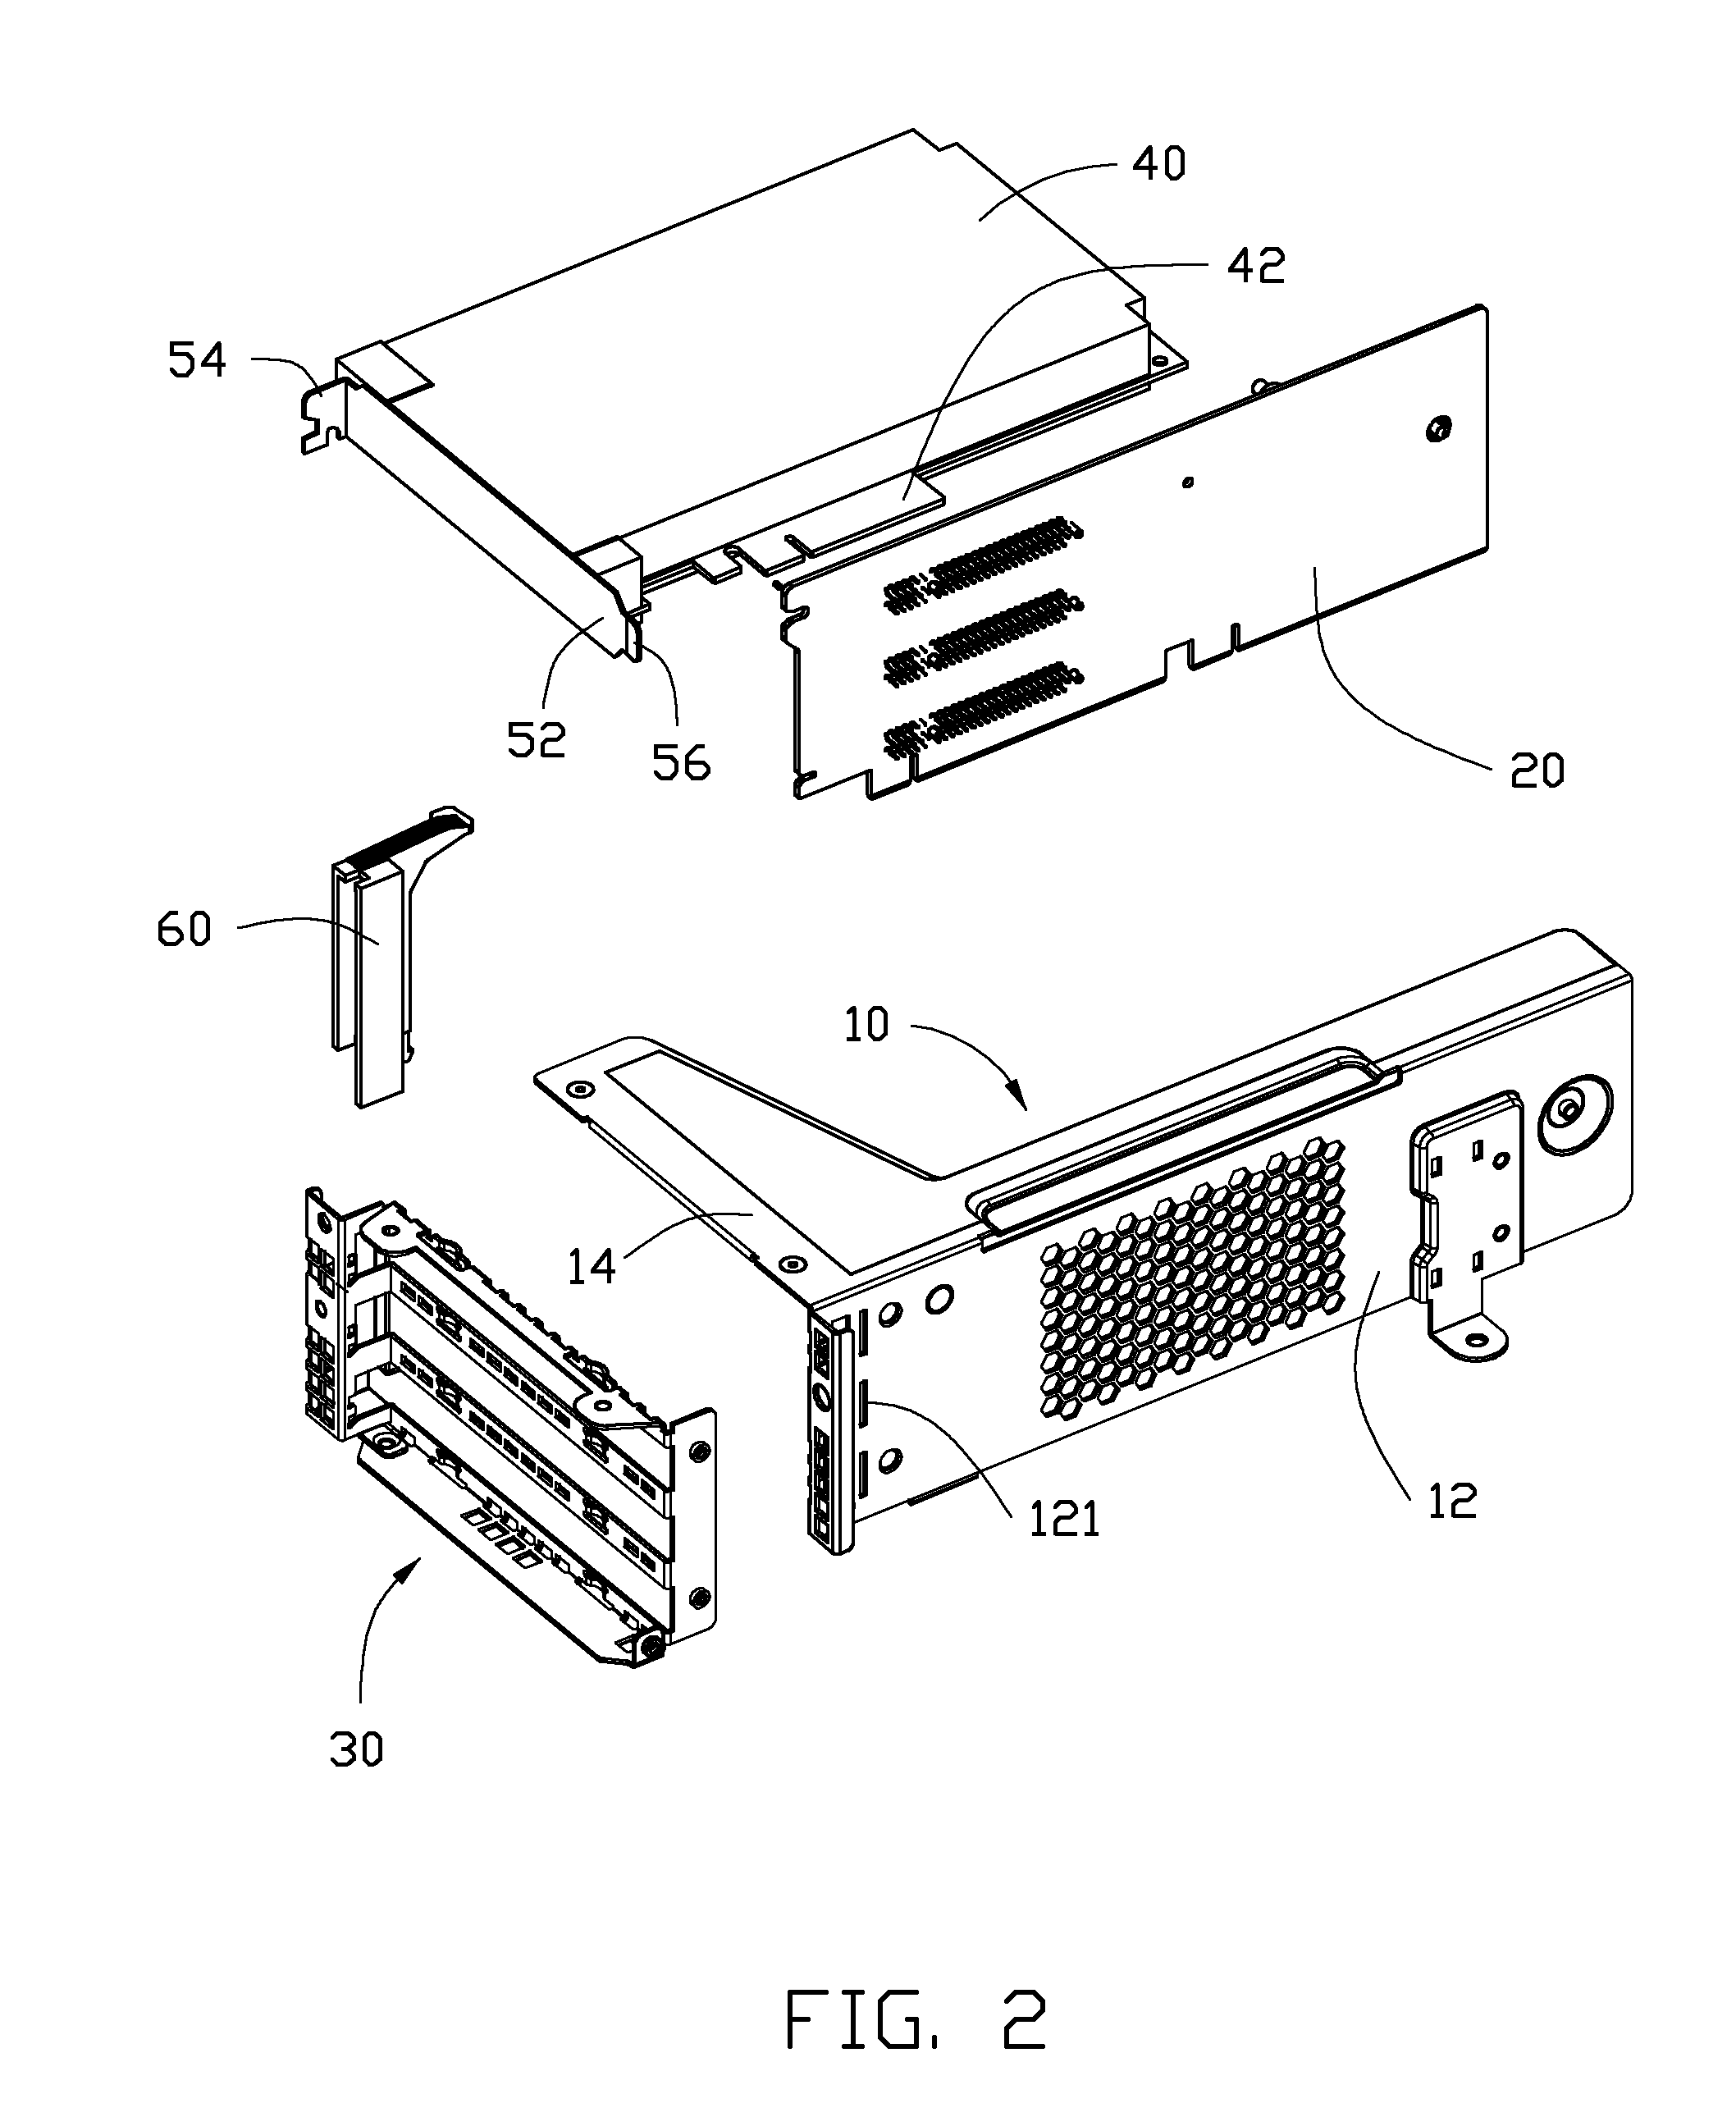 Expansion card mounting assembly